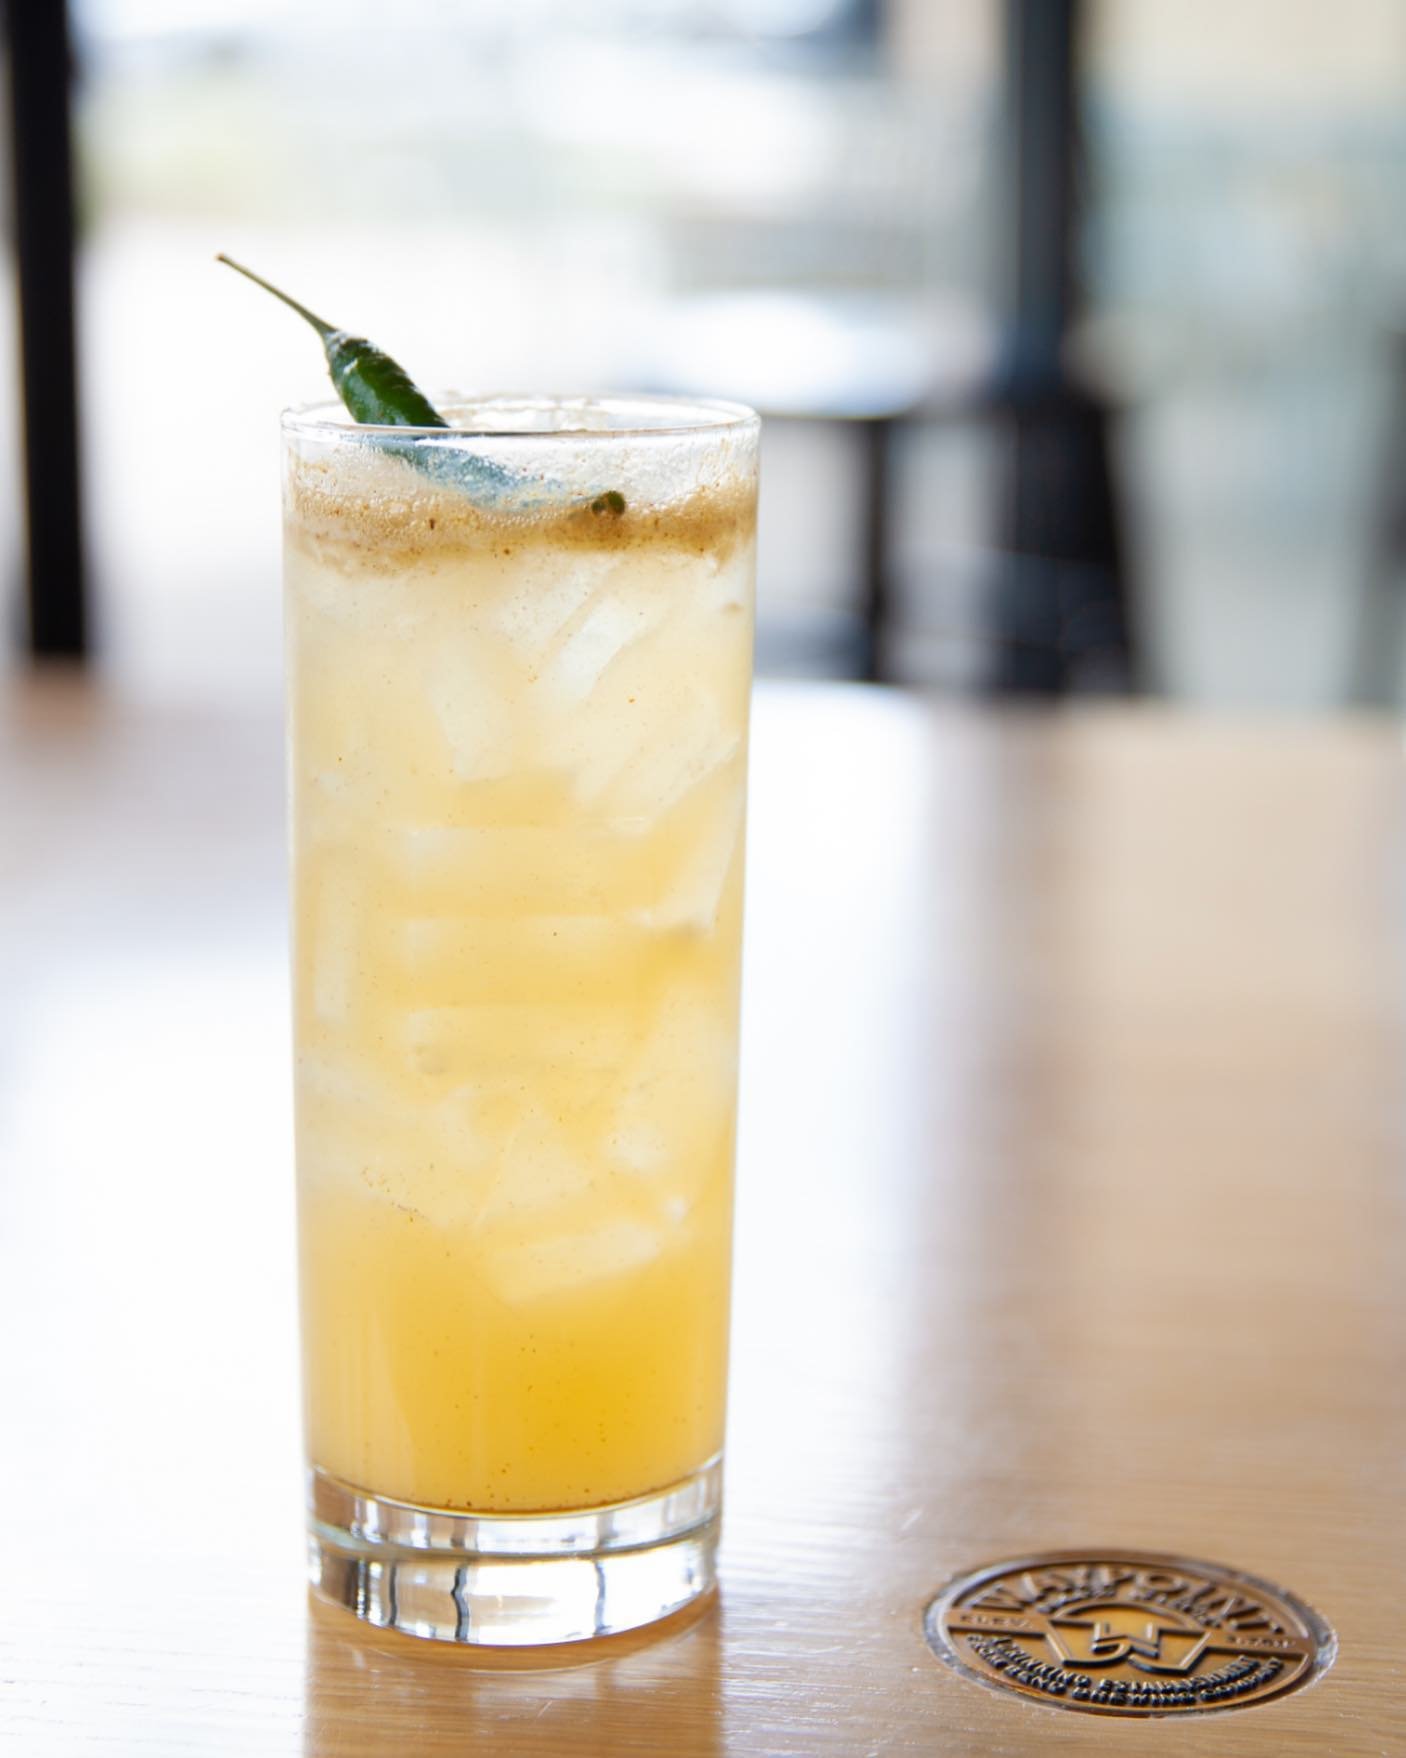 Our Spring/Summer menu is here! 

#EastMeetsWest
Timberline Vodka
@newdealpdx Hot Monkey
Liqueur Strega
Pineapple Juice
Za&rsquo;atar 
Thai Chili Agave 
Lime

📸 @nwxnathan 

#waypointbbc